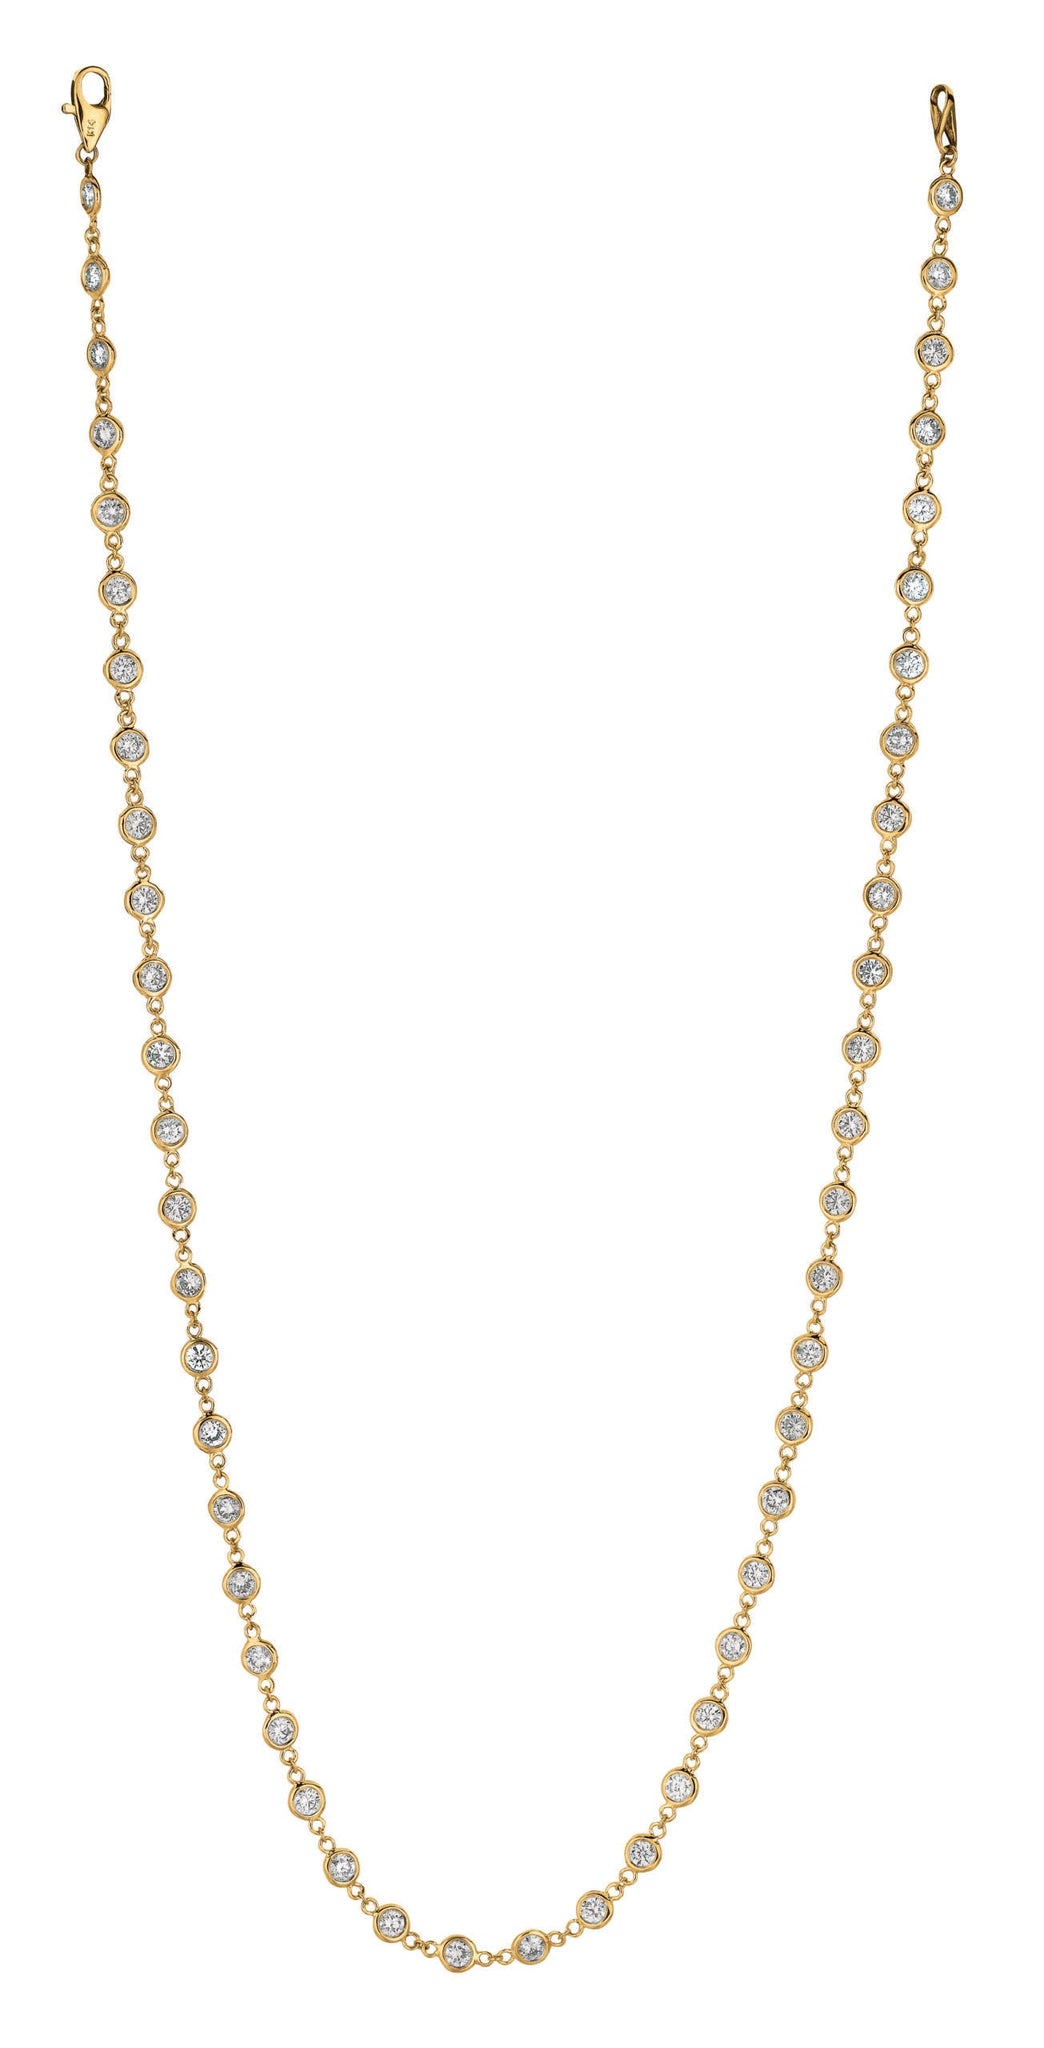 2 POINTER 67 SECTION 17″ DIAMOND NECKLACE 14K YELLOW GOLD (1.51 CTW)